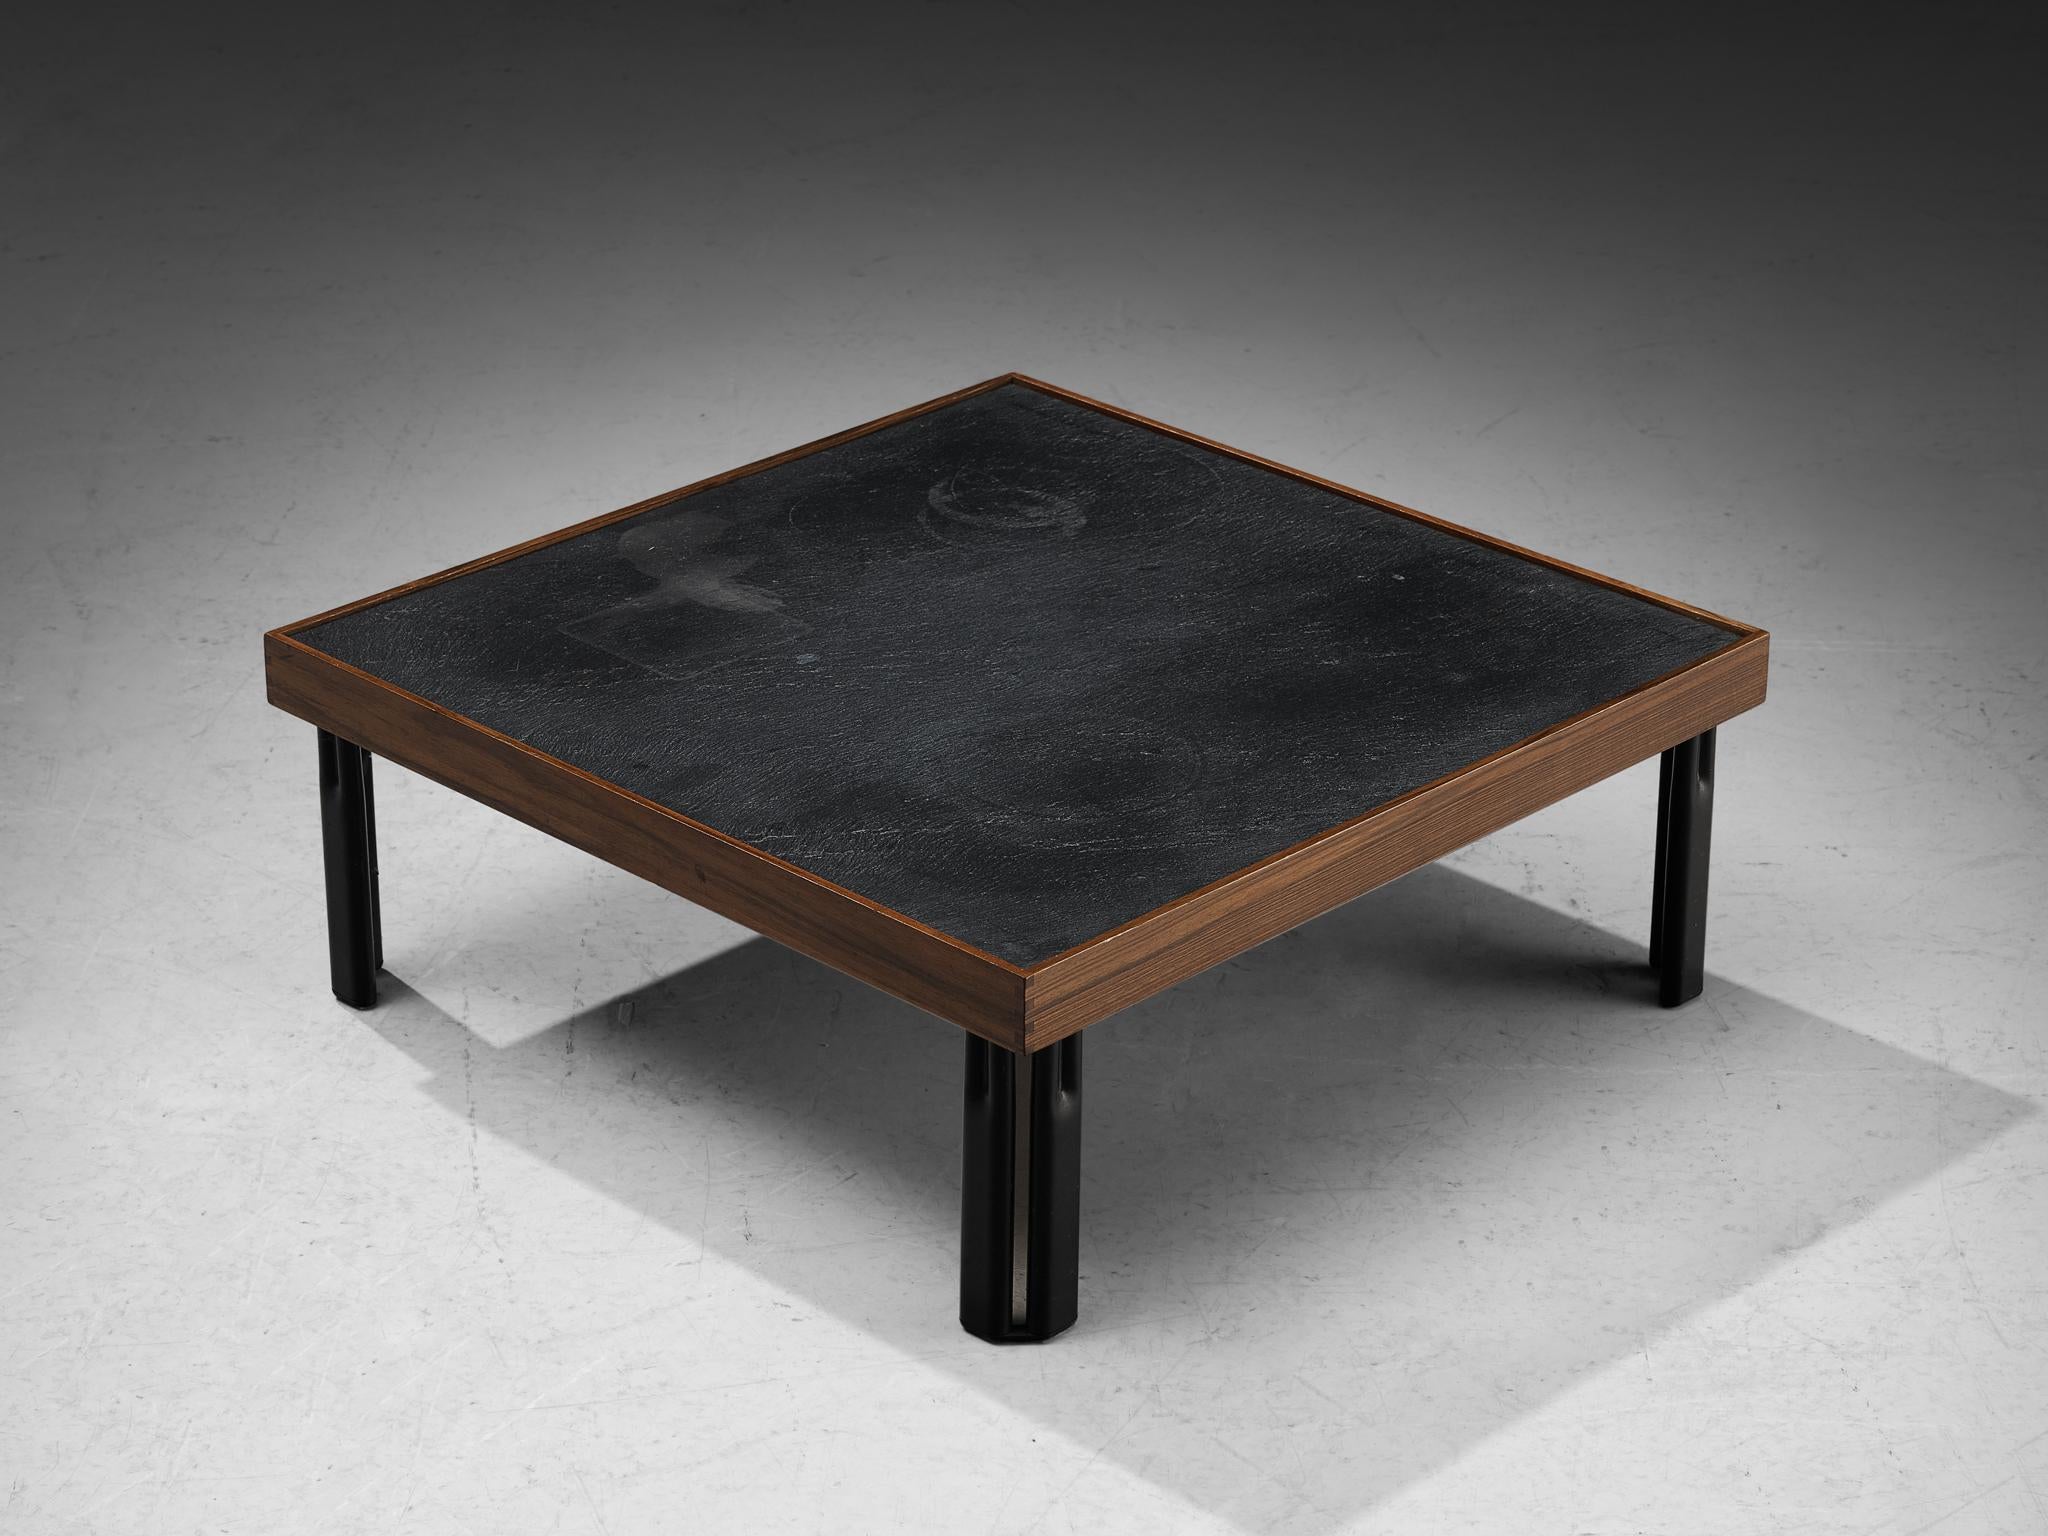 Piero De Martini for Cassina, 'Naviglio' coffee table, walnut, slate, metal, Italy, 1980s

This low table features are modernly structured, featuring a clear square table top executed in slate and surrounded by a walnut frame. The double black